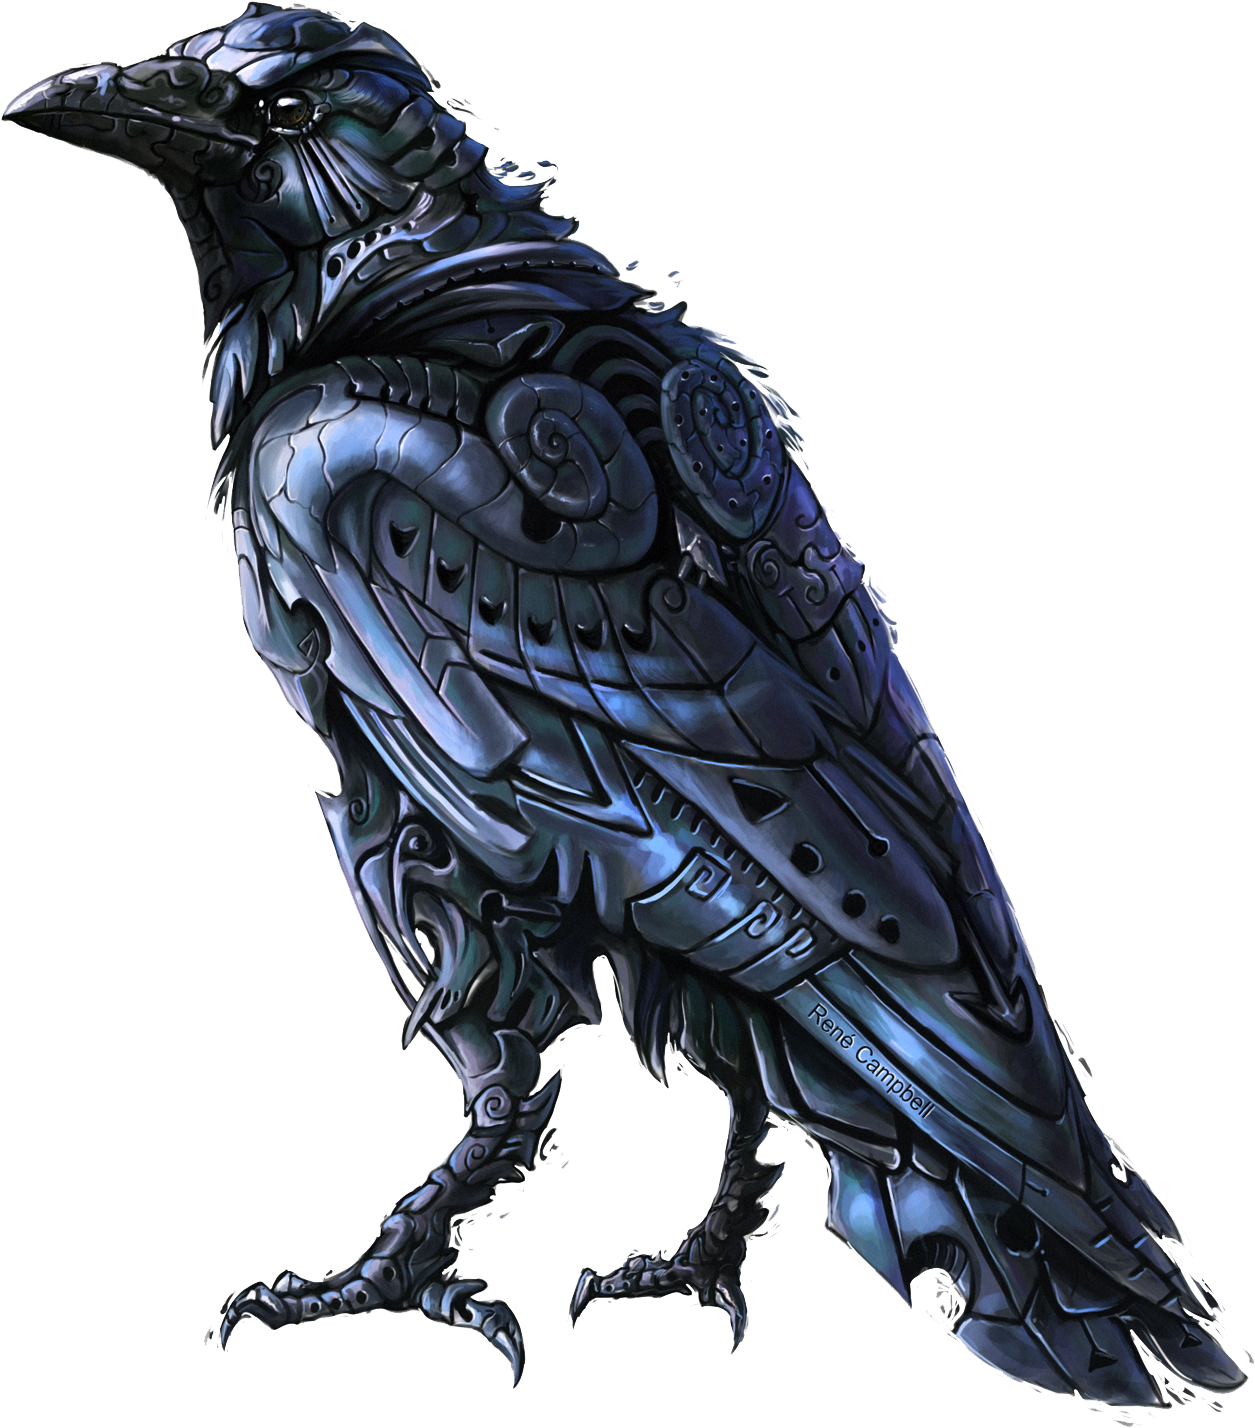 A Metal Bird With A Black Background